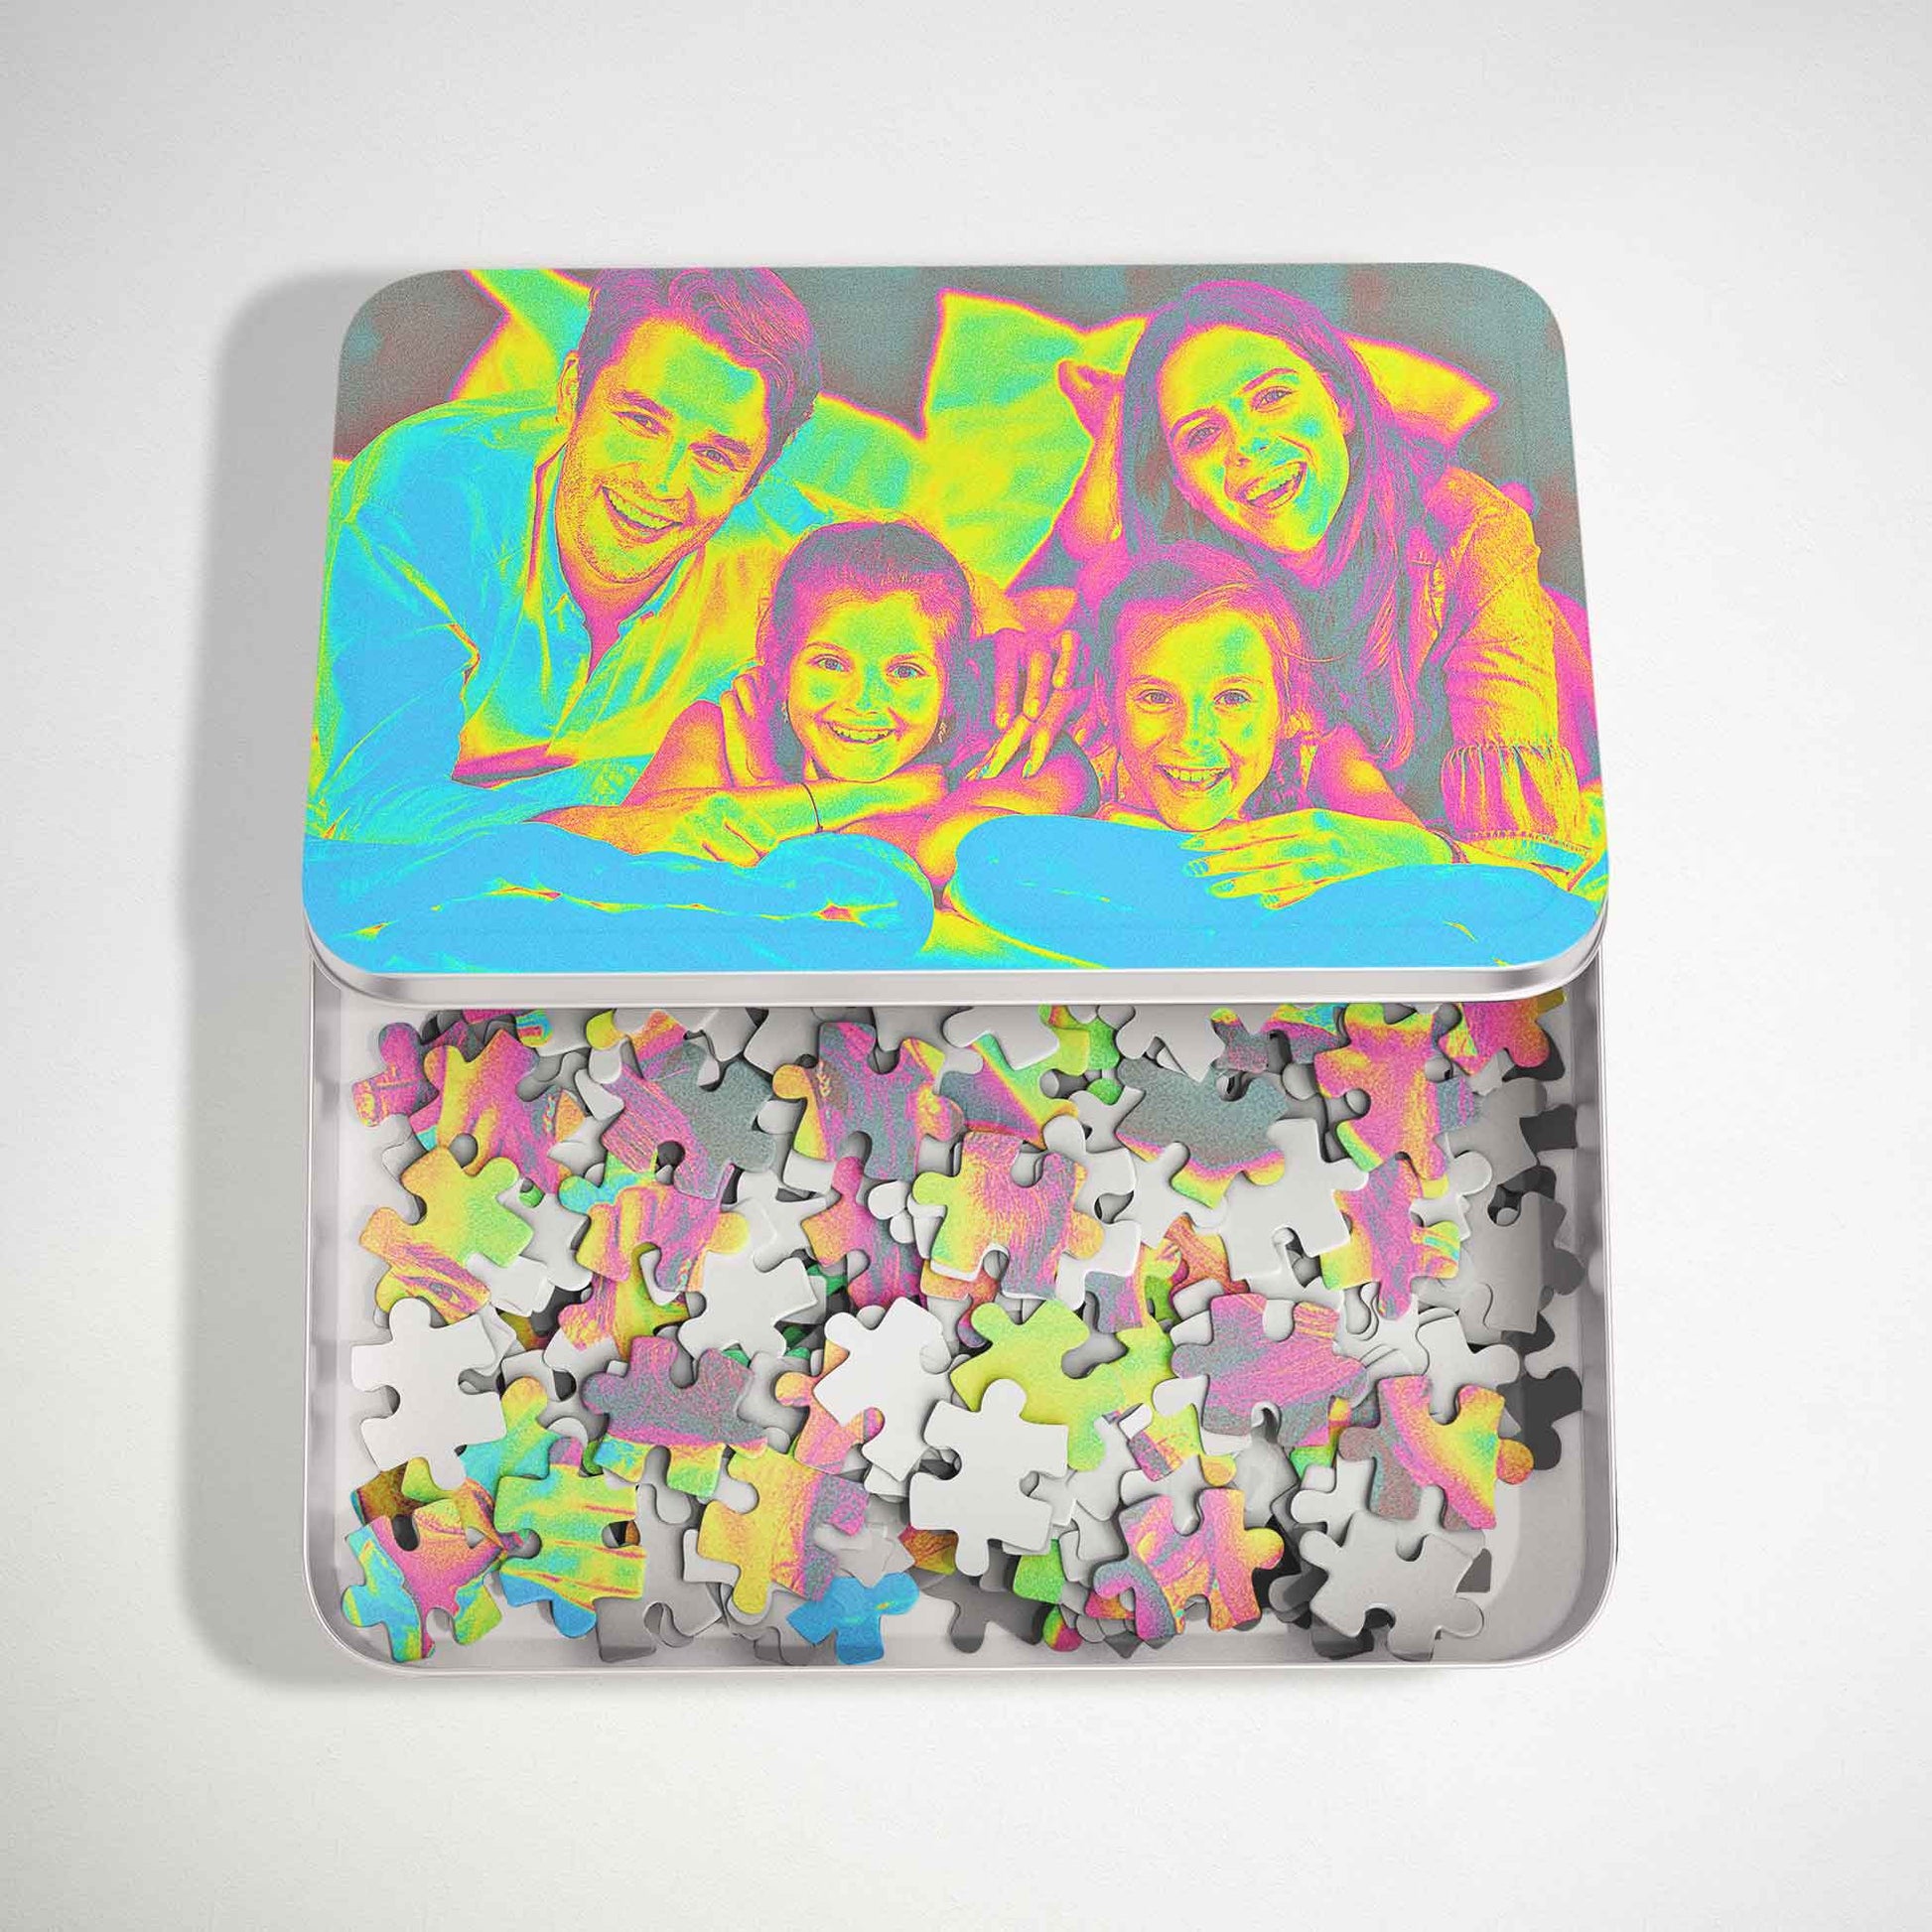 Elevate your gifting with our Personalised Acid Trip Jigsaw Puzzle. Print from photo, showcasing cool acid colors effect in blue, green, and pink hues. Handmade and fresh, it's a unique and edgy gift for friends and family